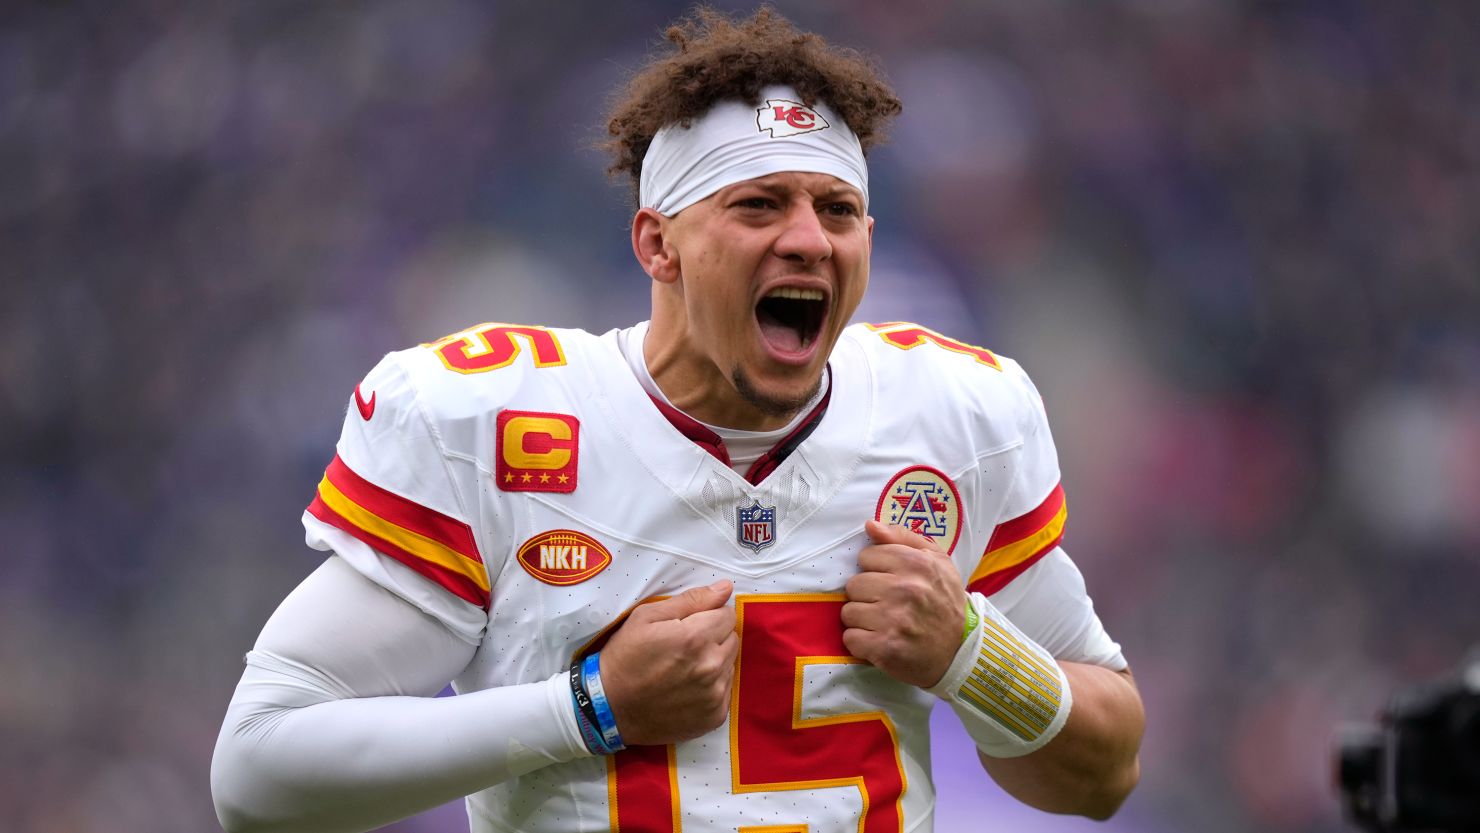 Patrick Mahomes: The Evolution Of A Superstar